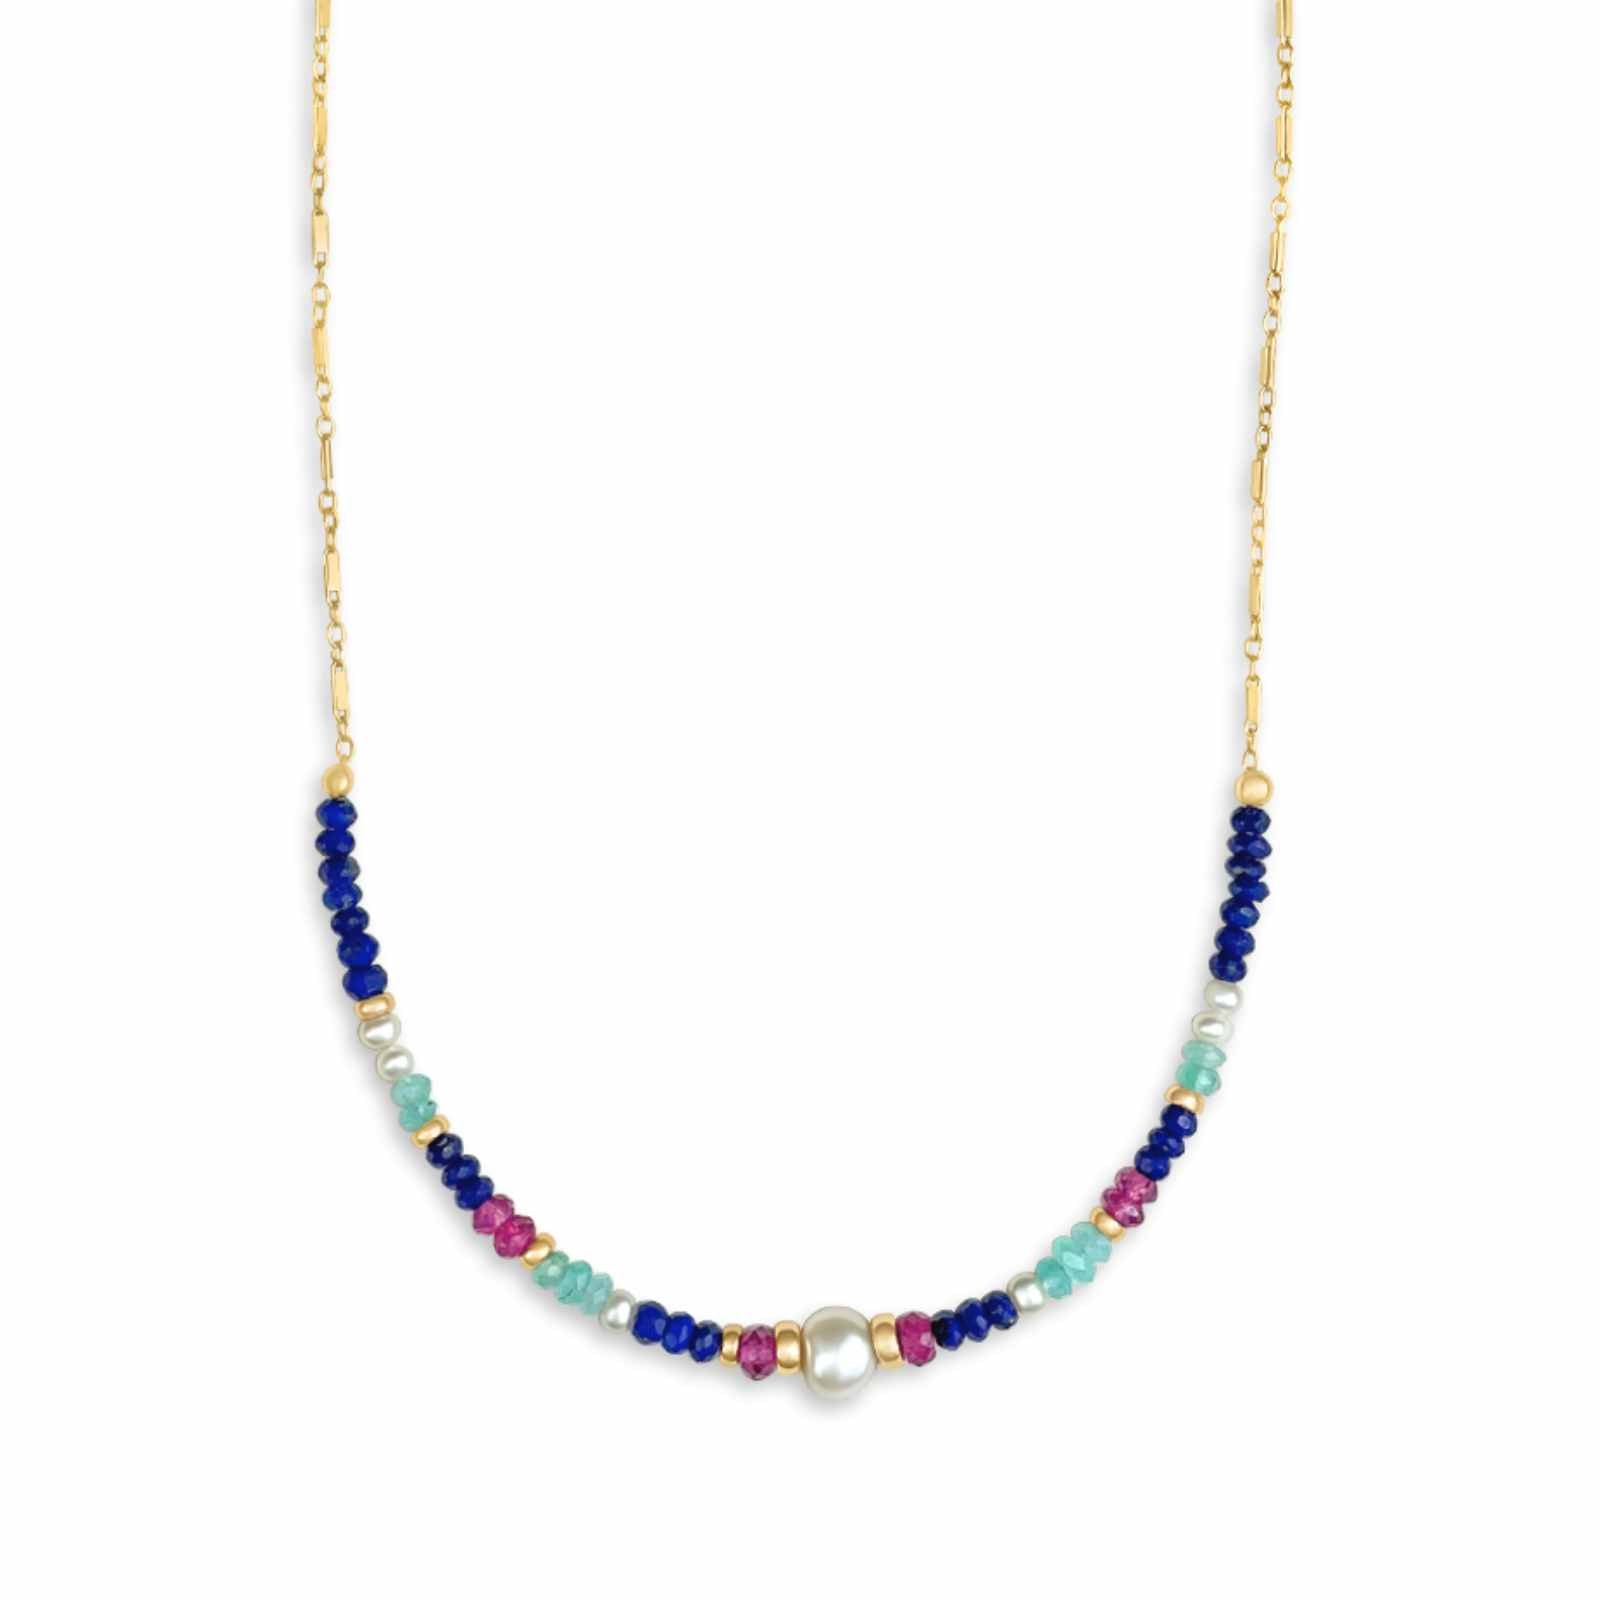 Lapis Beads And Pearls Necklace - Camille Jewelry